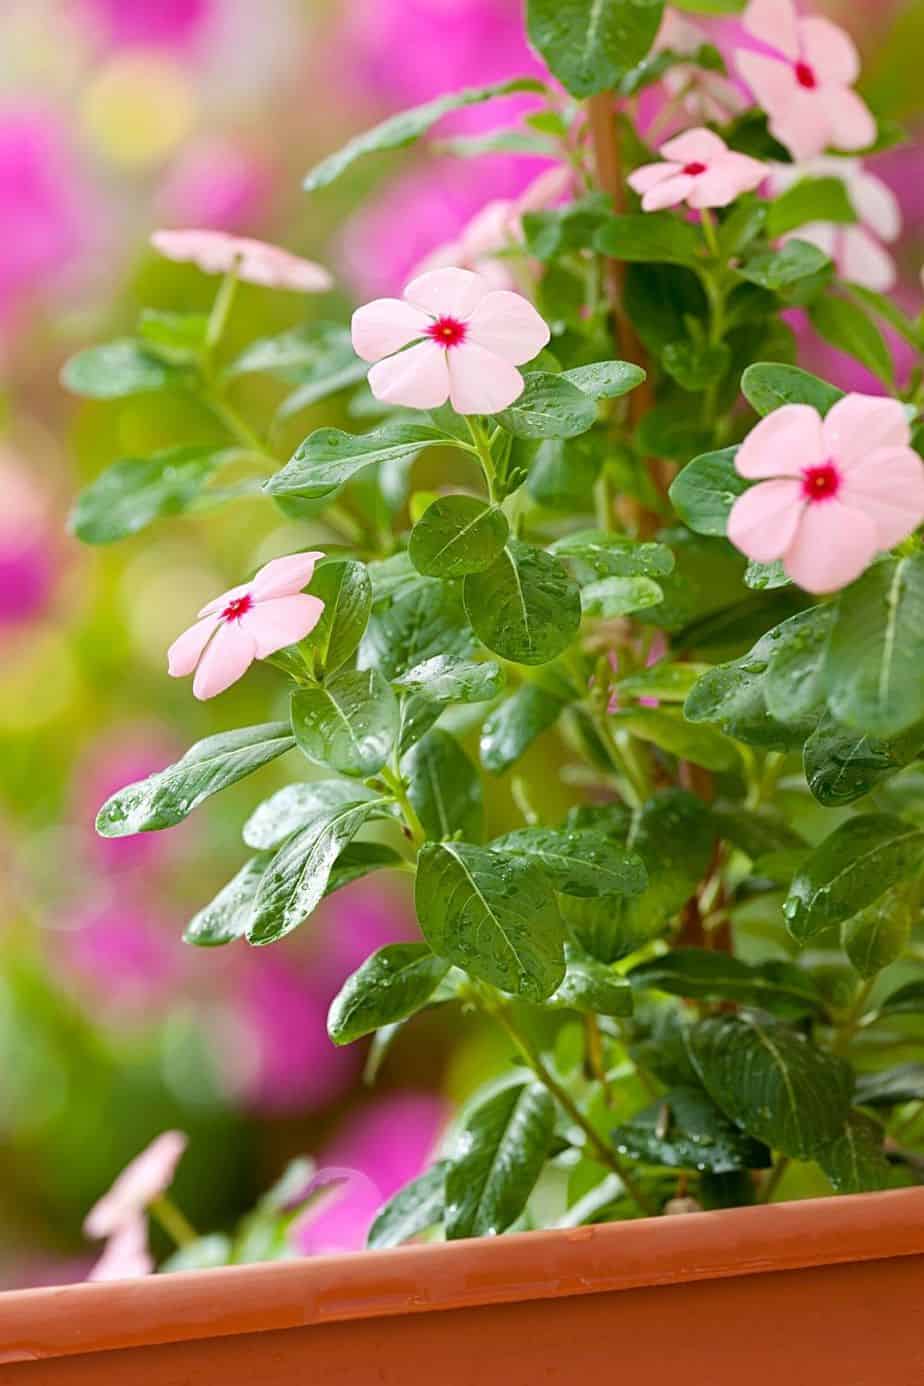 With its long-blooming season, Impatiens is a popular choice to decorate shaded areas like in your northeast-facing garden